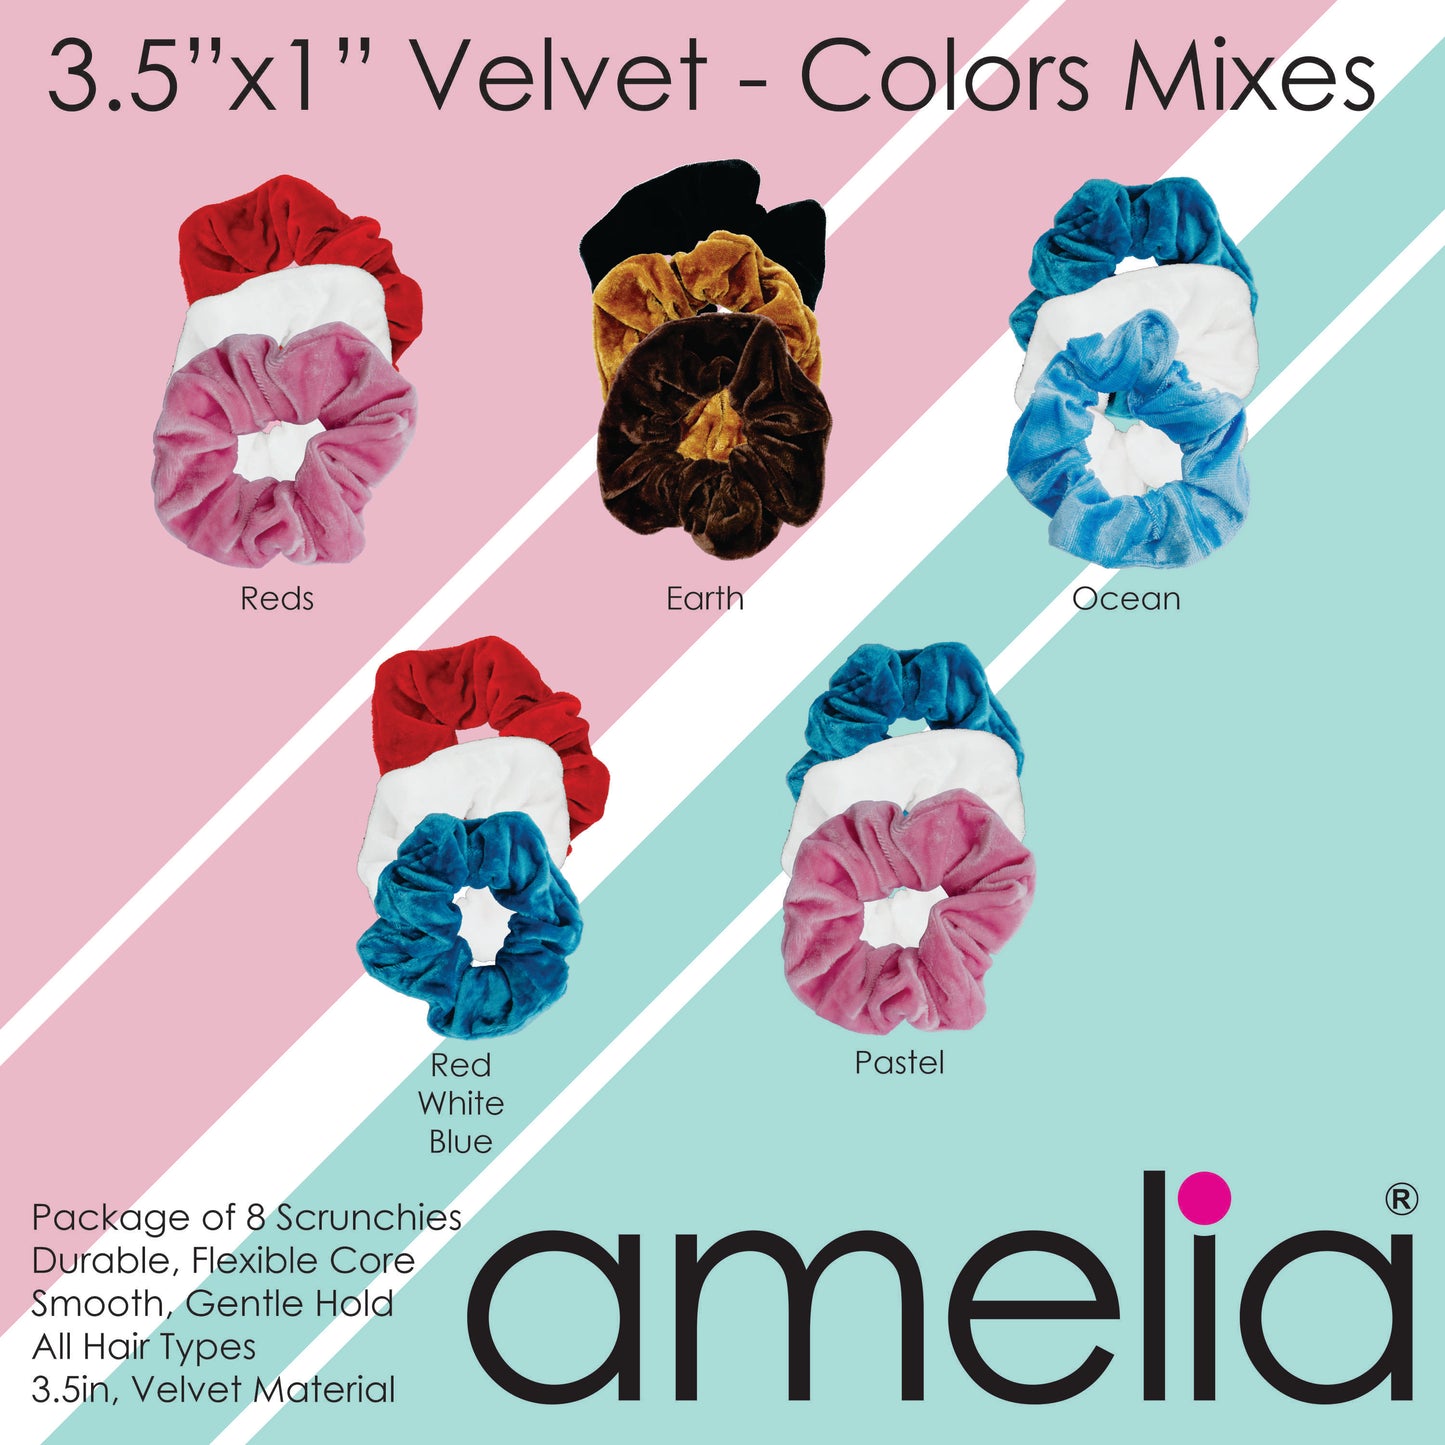 Amelia Beauty, Reds Mix Velvet Scrunchies, 3.5in Diameter, Gentle on Hair, Strong Hold, No Snag, No Dents or Creases. 8 Pack